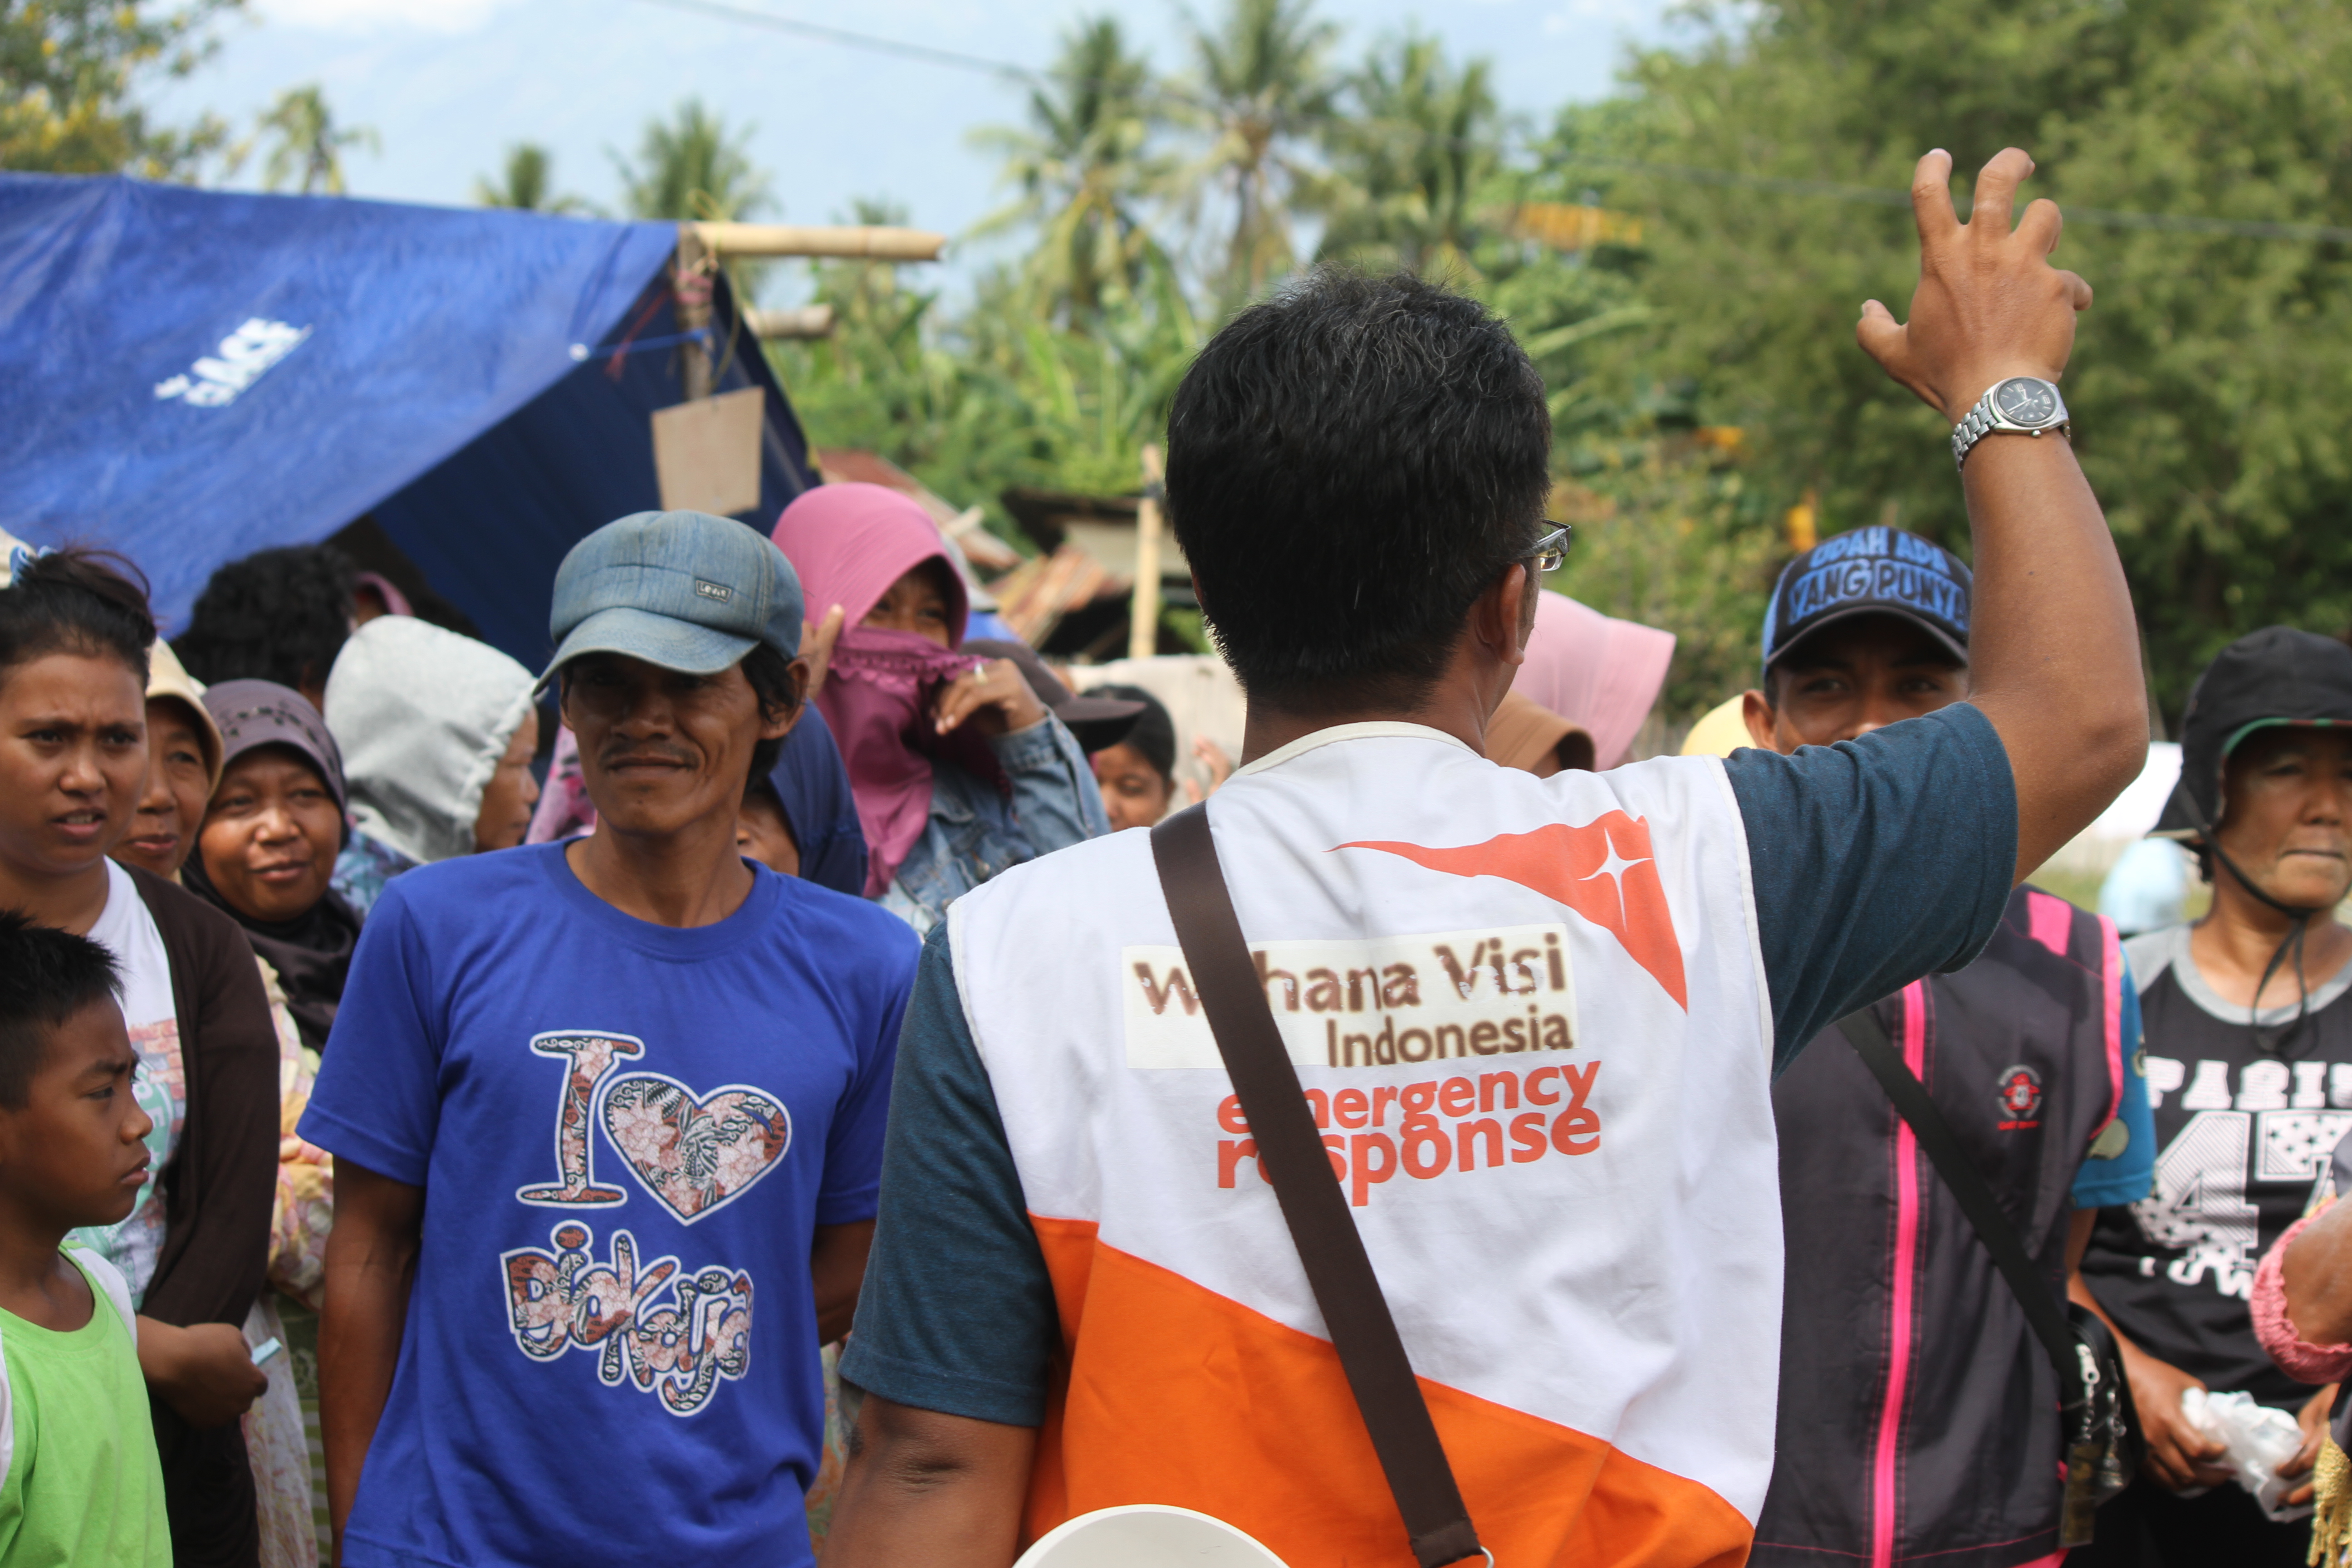 World Vision staff member waves with his back to camera in front of a crowd of people